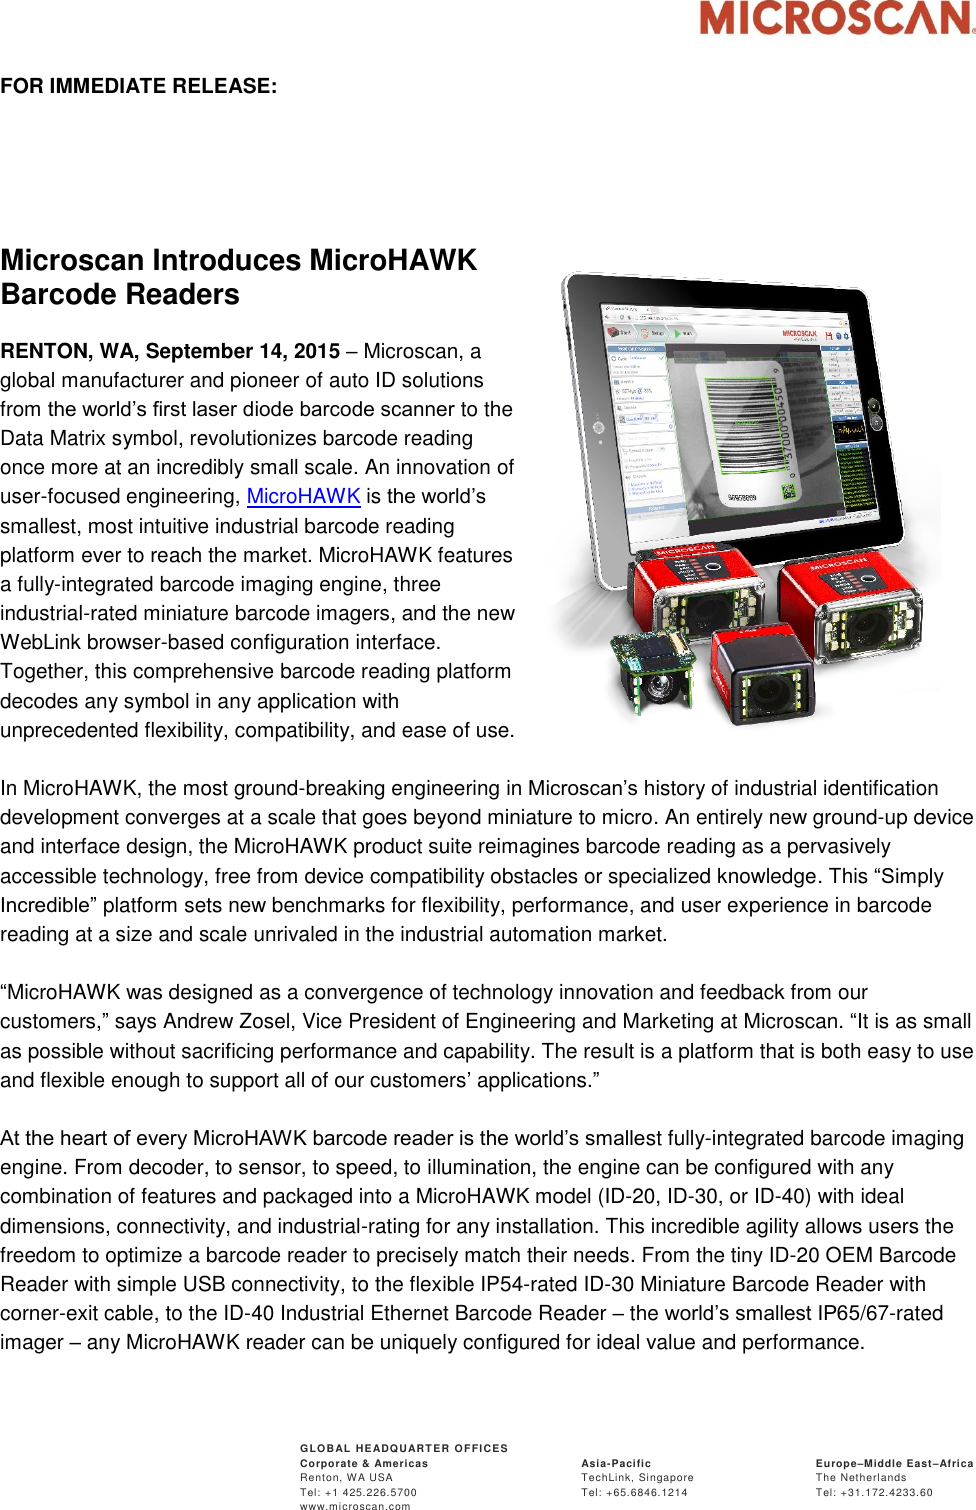 Page 1 of 2 - Microscan  2015-09-14 Microscan-Introduces-Micro HAWK-Barcode-Readers